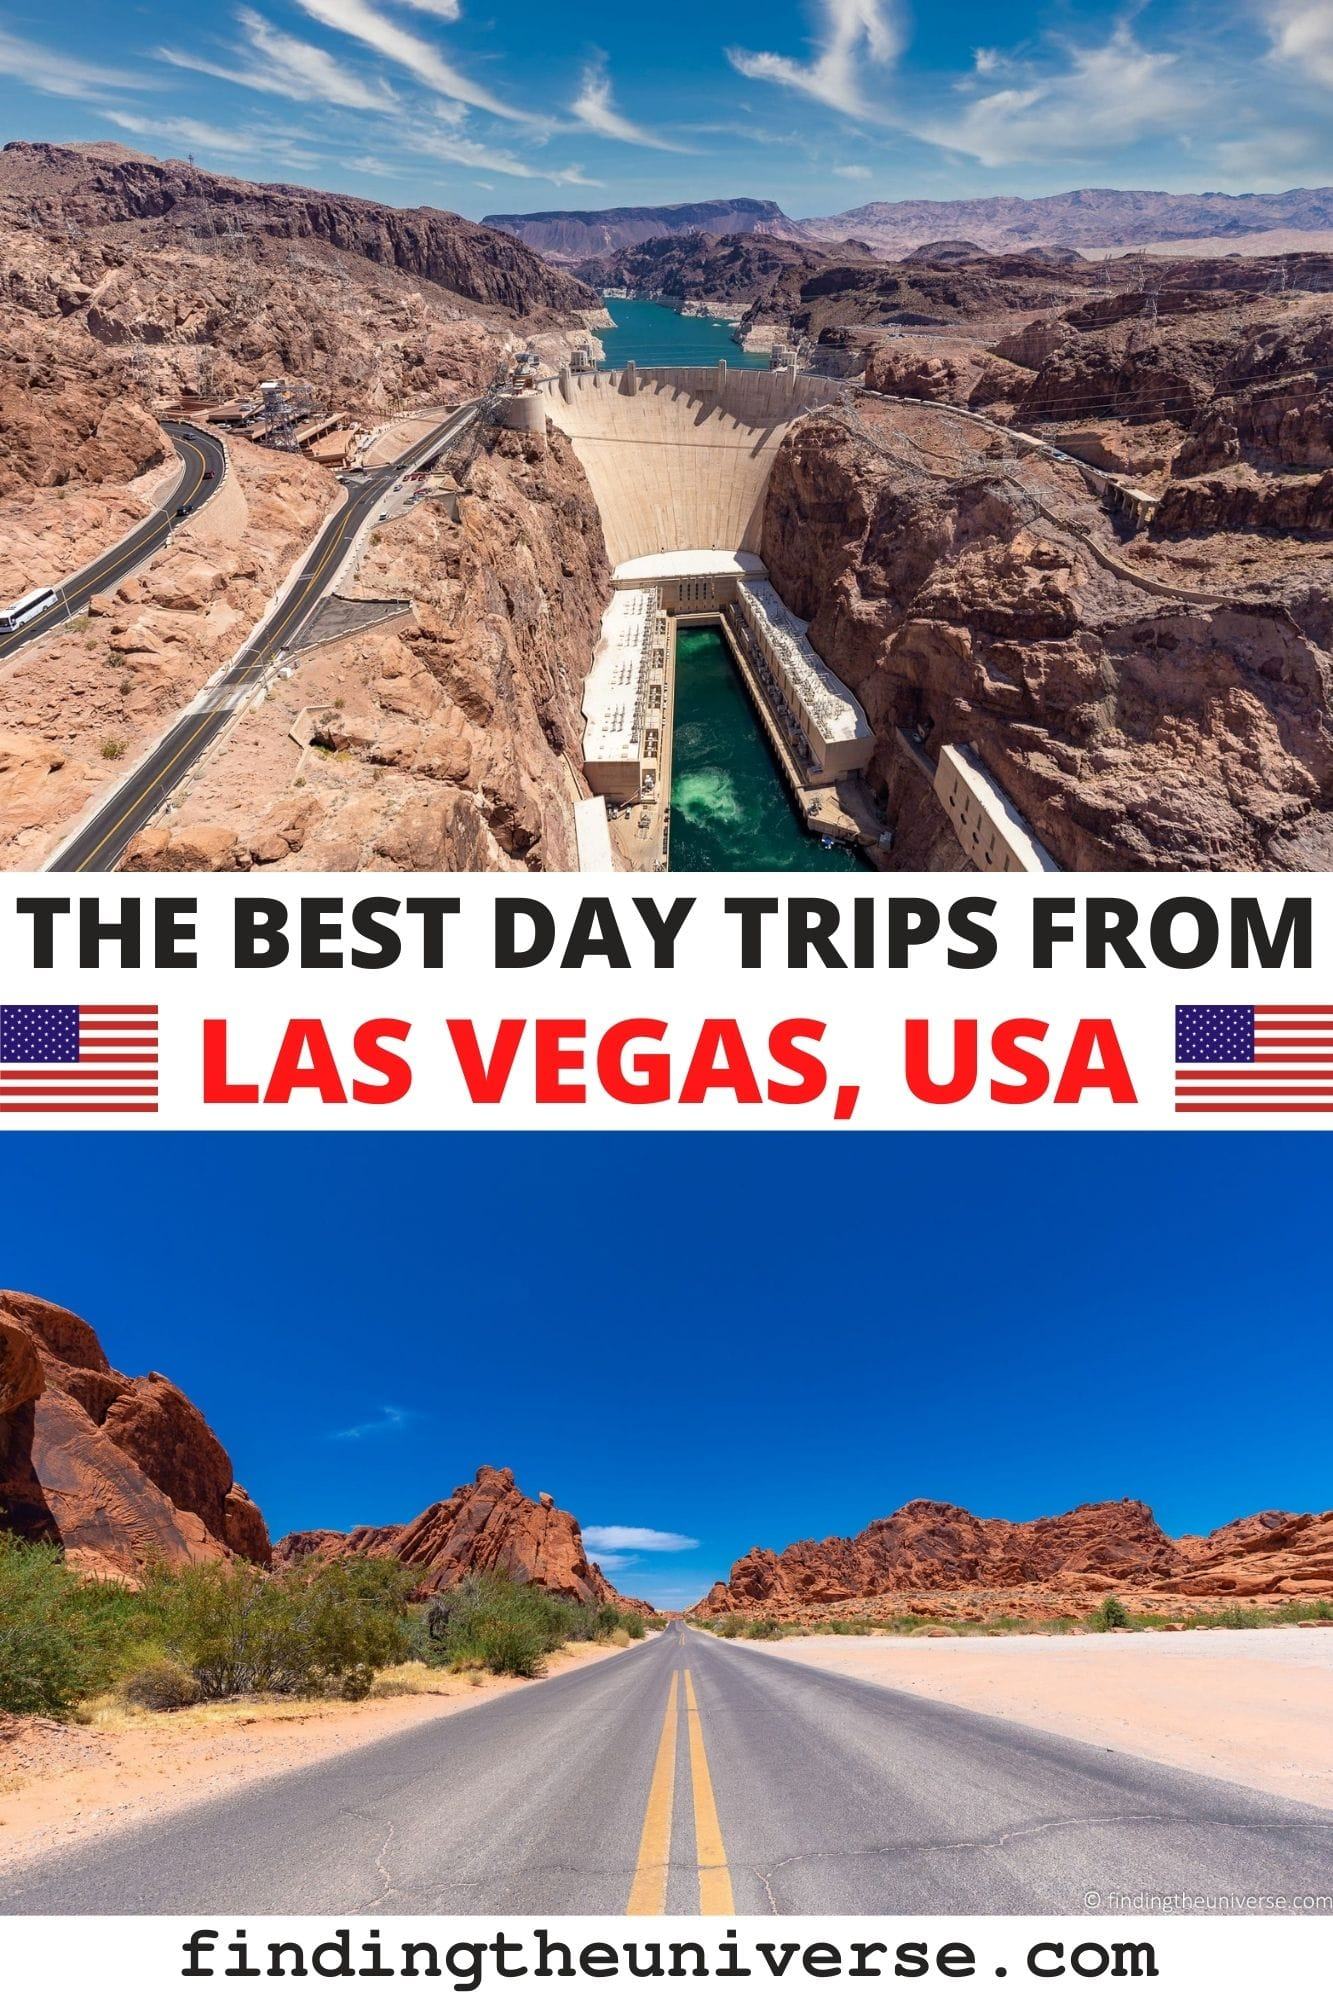 Guide to the best day trips from Las Vegas. Everything you need to plan a day out from Las Vegas, from the Hoover Dam to the Grand Canyon!